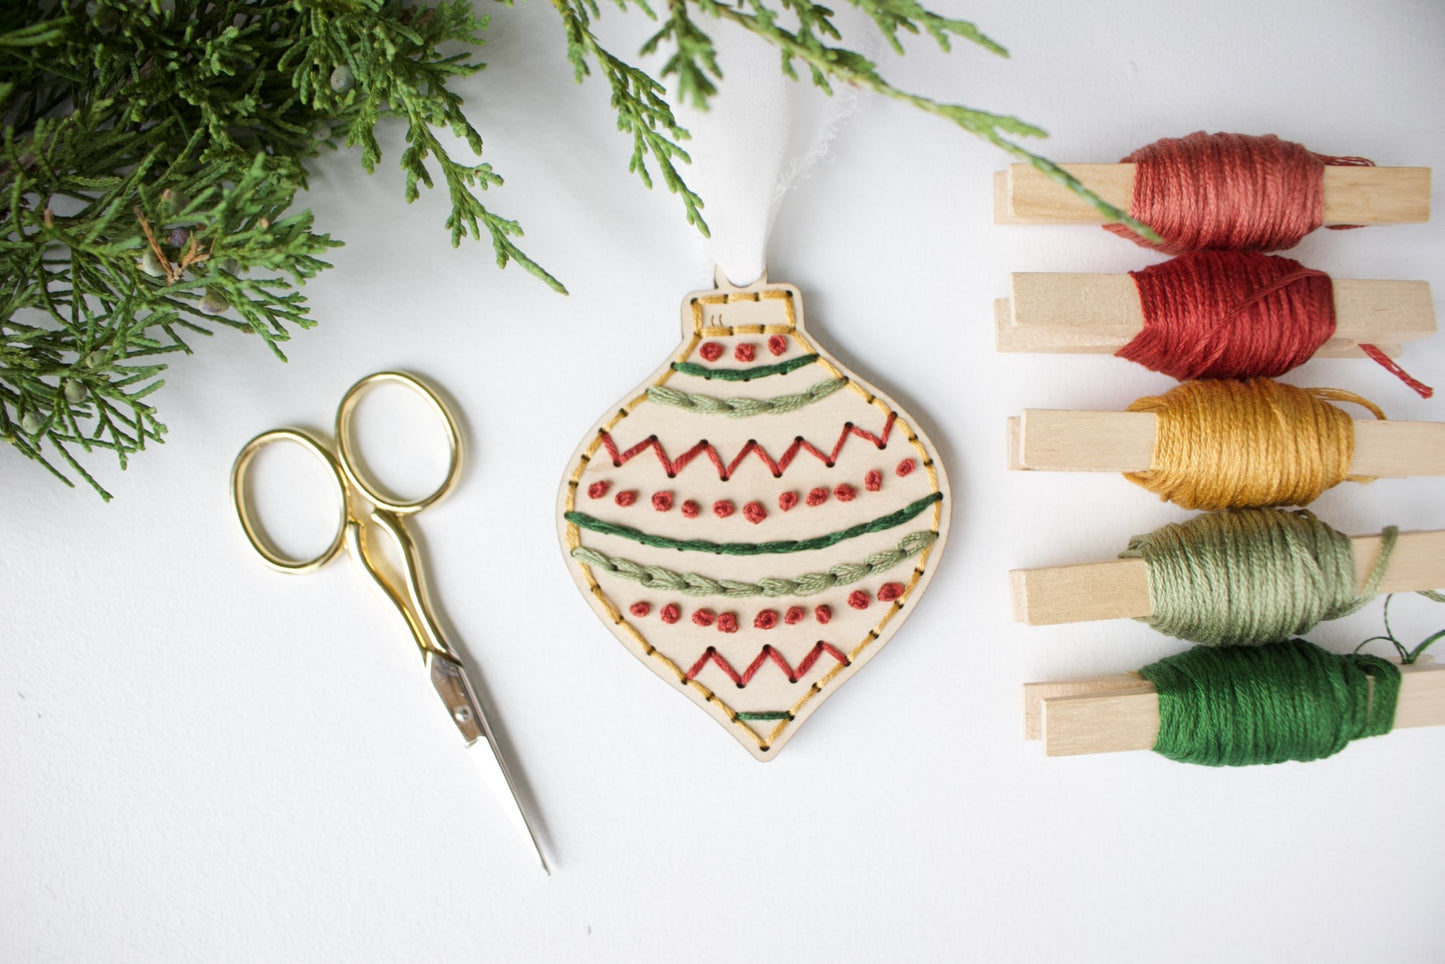 Wood Christmas Ornament Embroidery Kit - 8 Designs